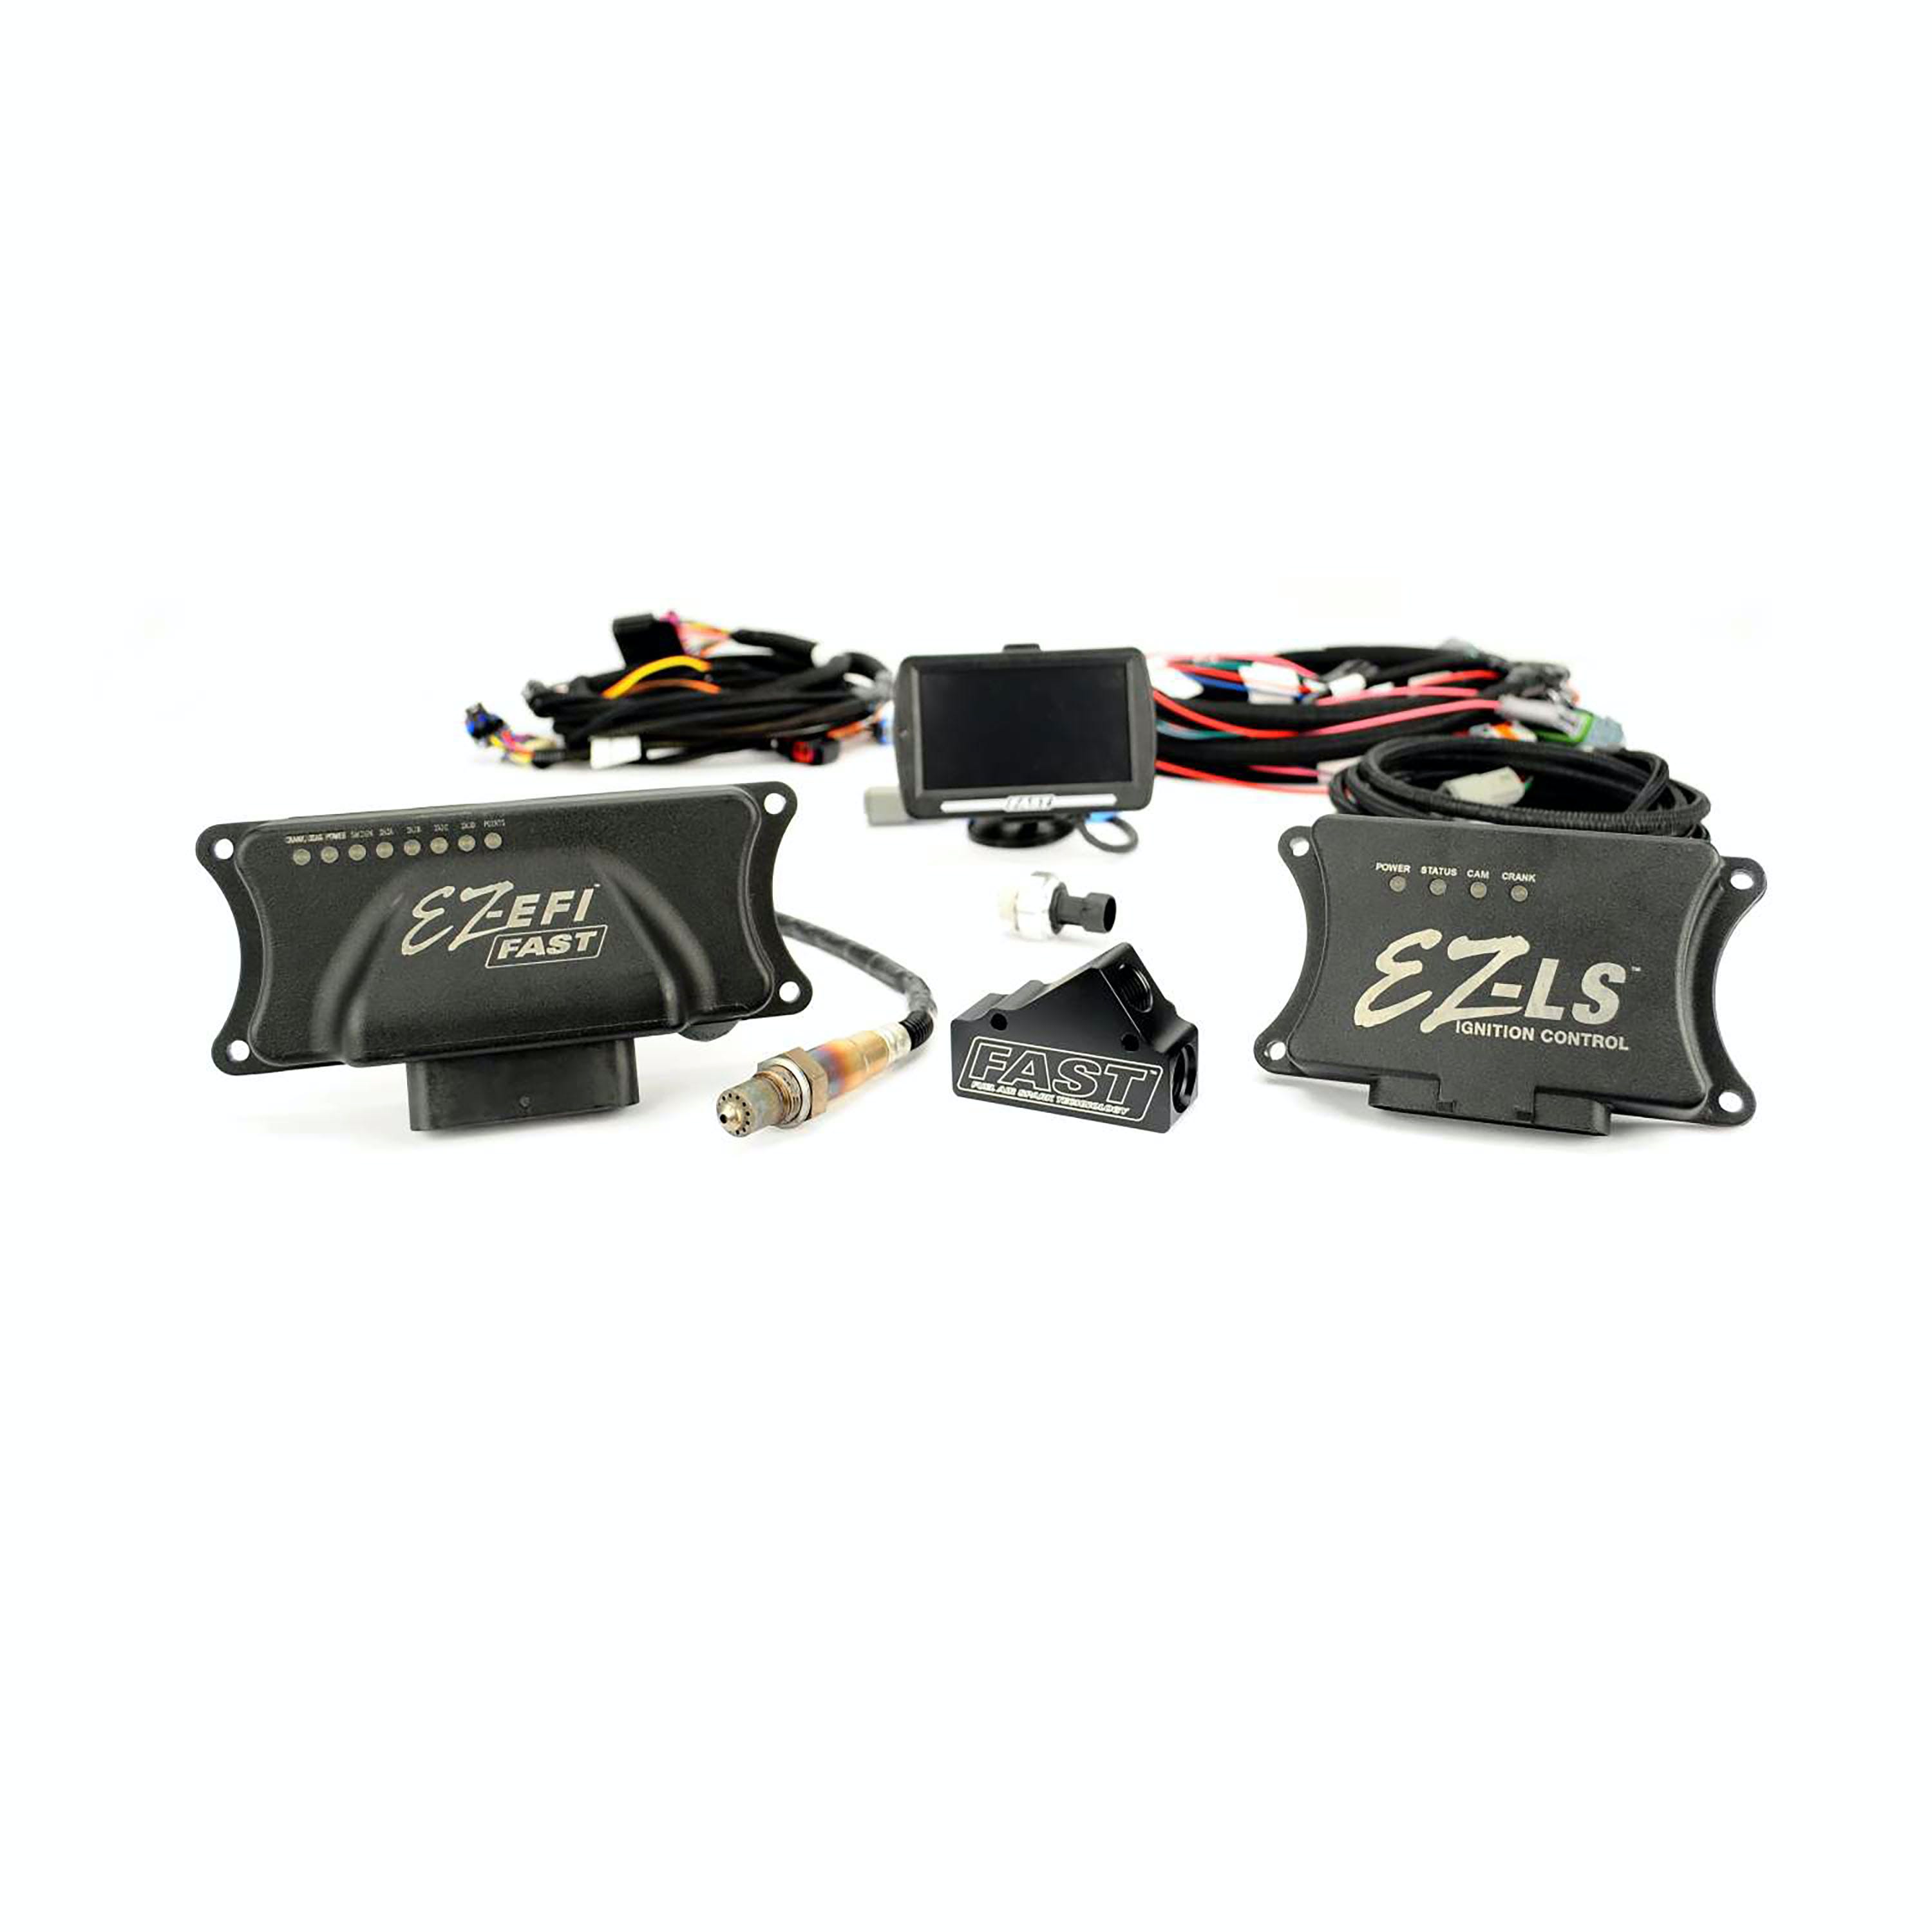 FAST - Fuel Air Spark Technology 30405-KIT EZ 2.0 Multiport Kit with EZ LS Ignition Controller